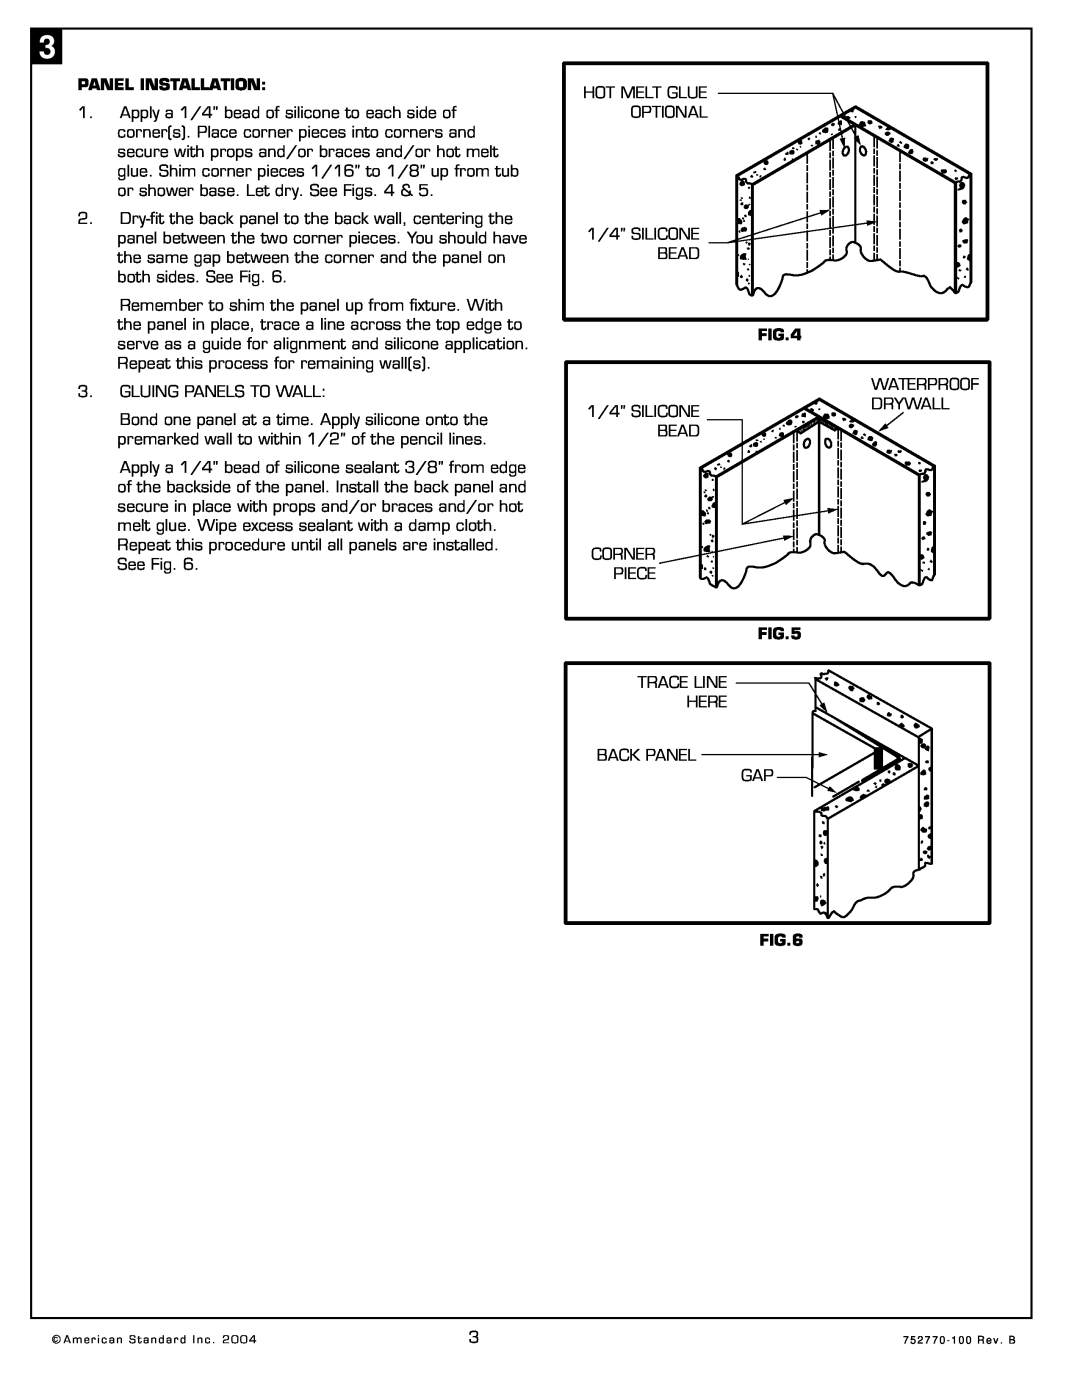 American Standard 3838.CWTS, 3636.SWTS, 6042.BWTS, 4834.SWTS installation instructions Panel Installation 